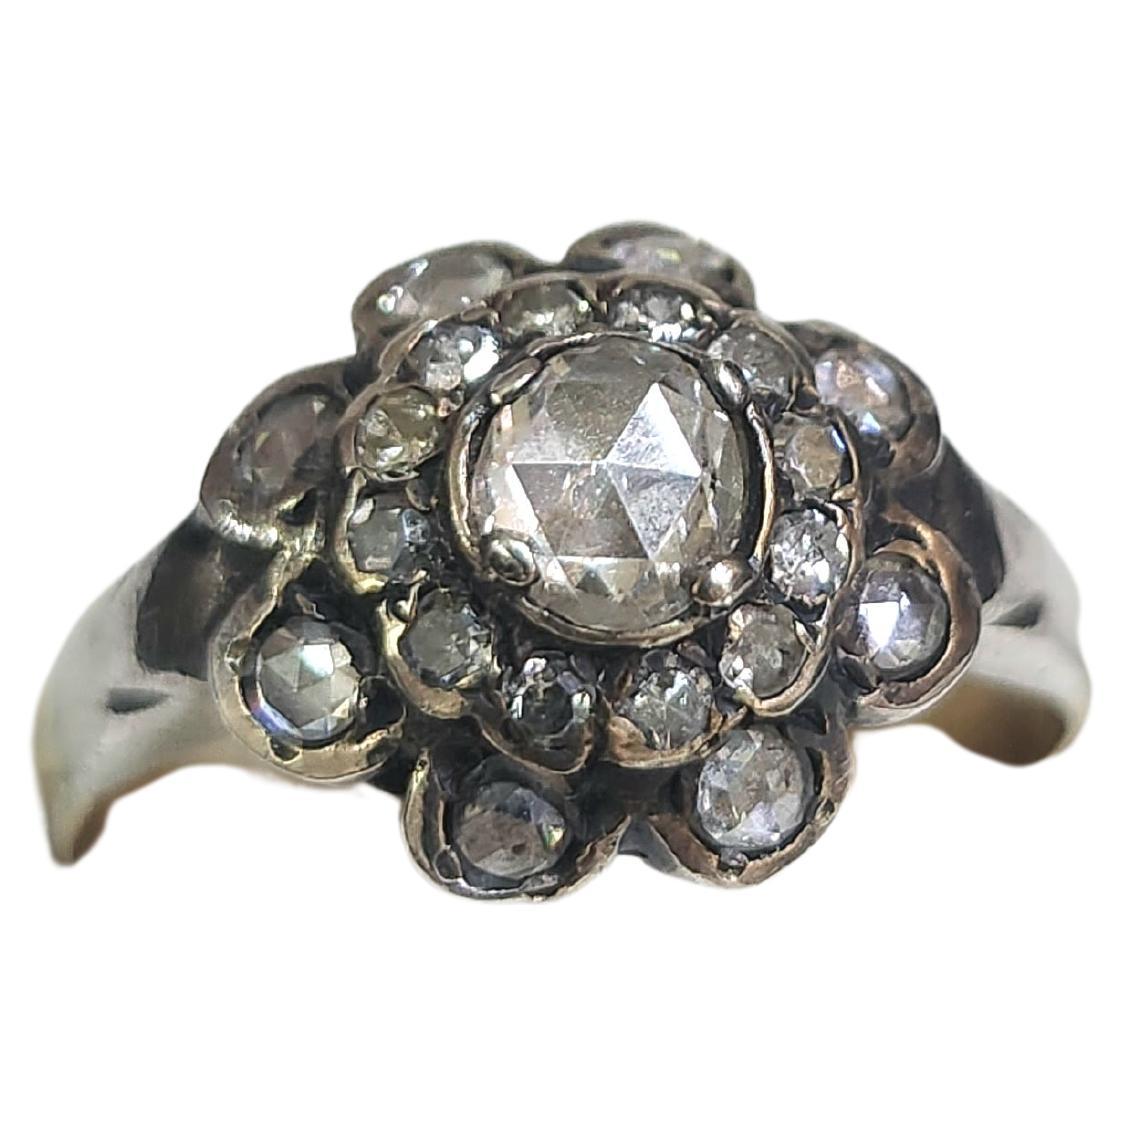 Antique early victorian era 1850s rose cut diamond ring in flower designe silver topped and 9k gold 